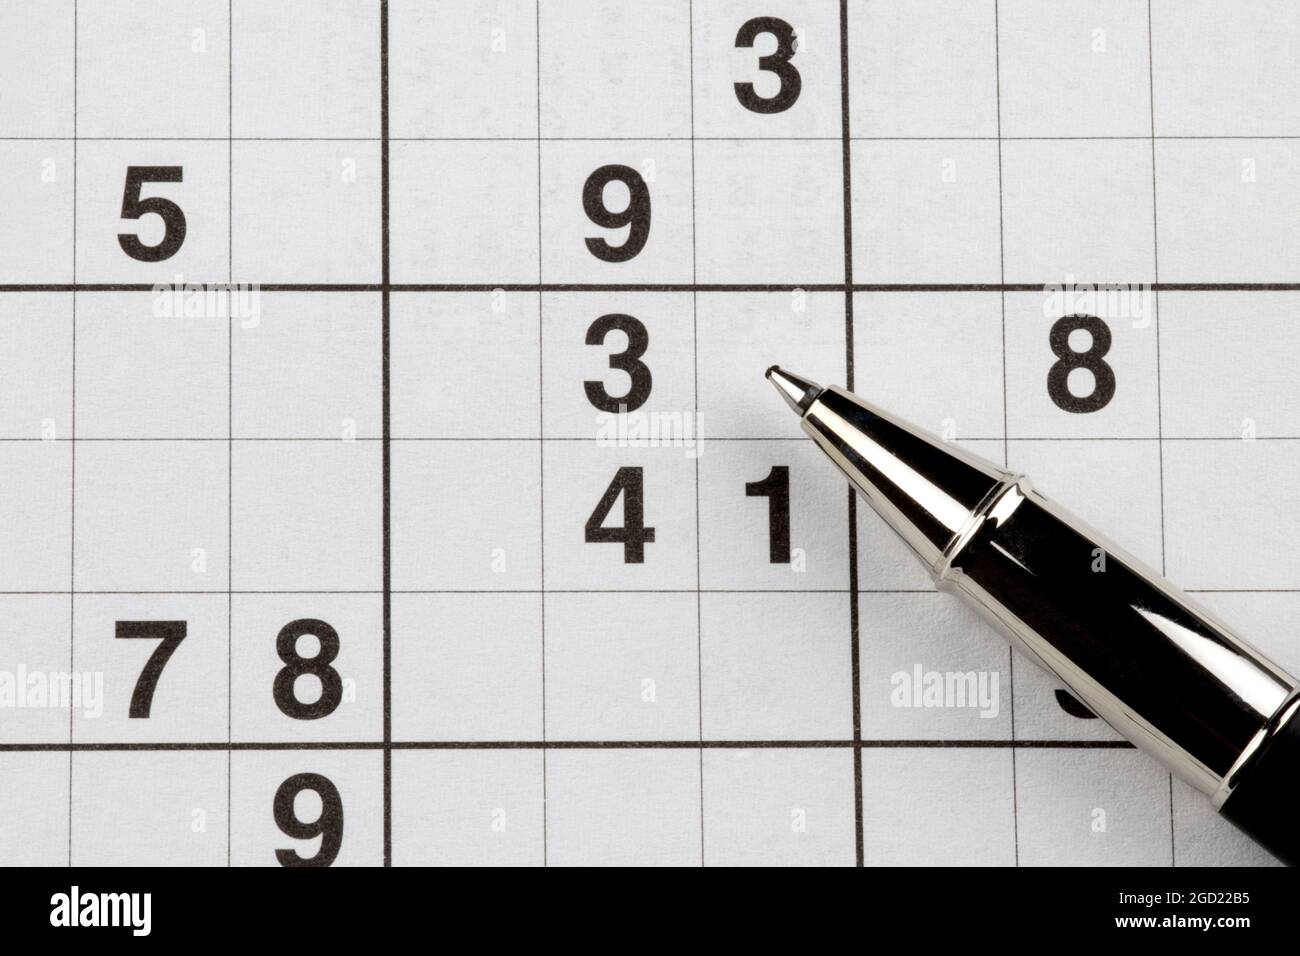 Sudoku number puzzle and pen closeup view Stock Photo